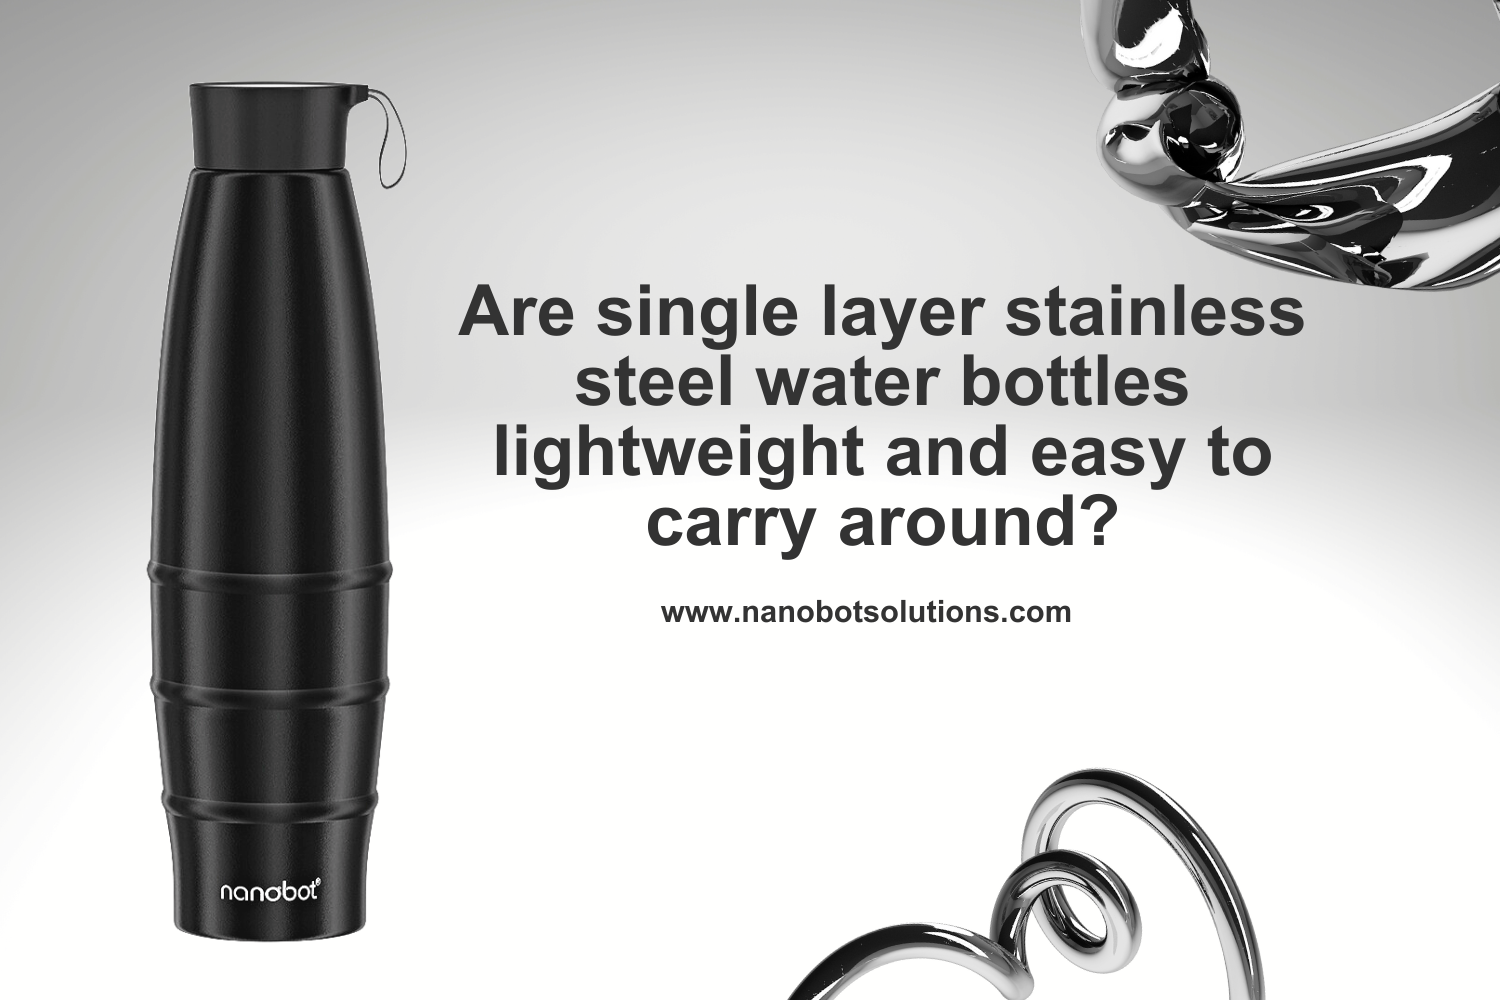 Are single layer stainless steel water bottles lightweight and easy to carry around?